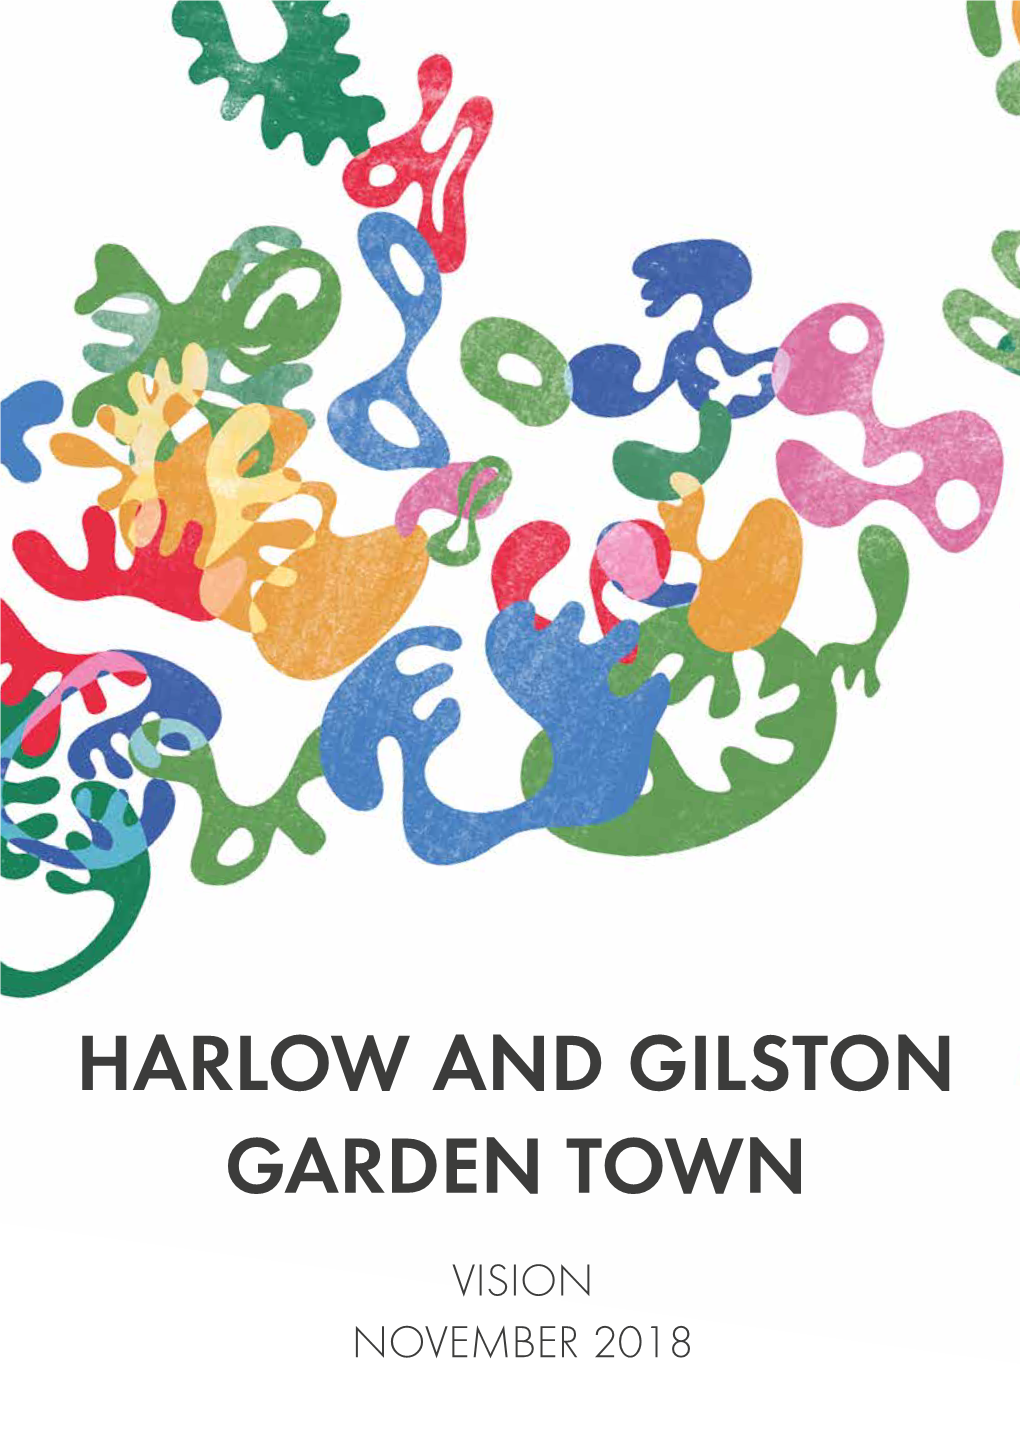 Harlow and Gilston Garden Town